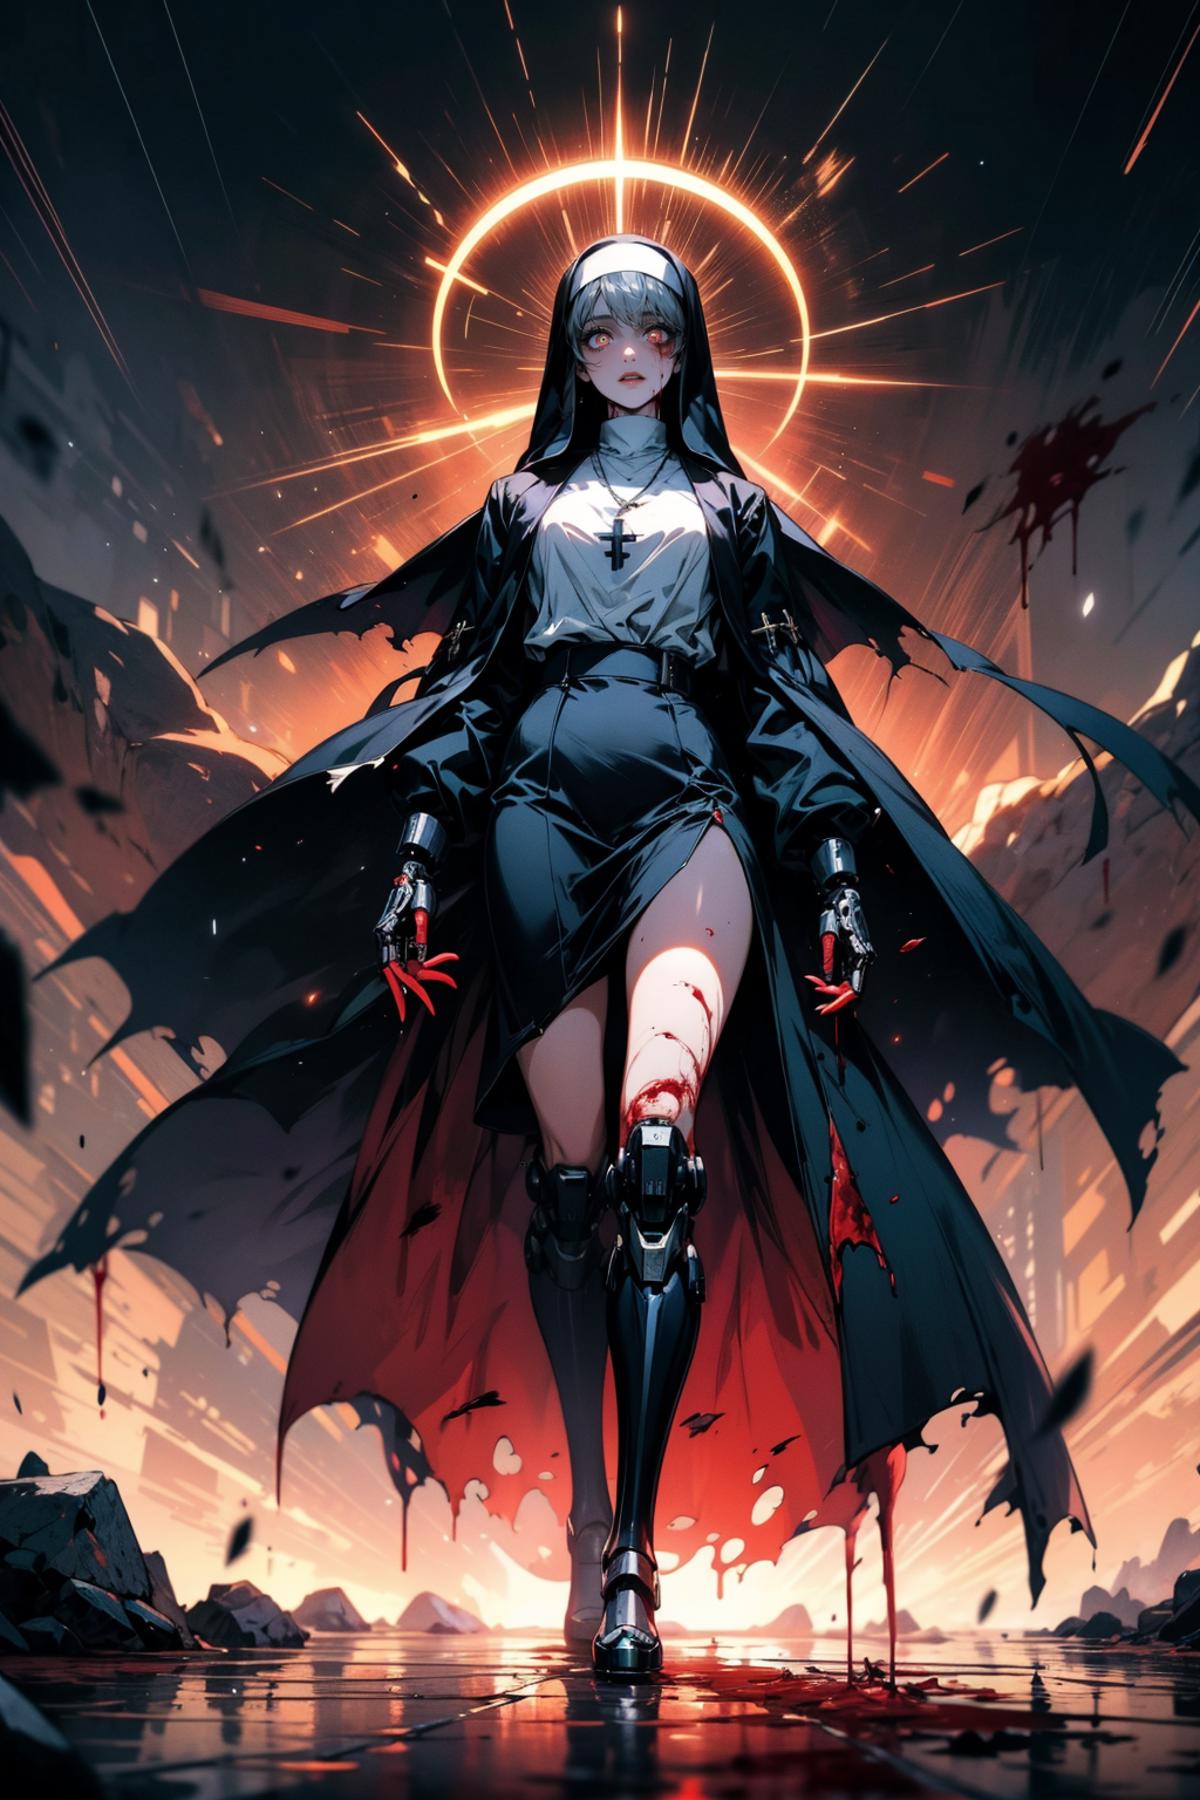 Anime-style illustration of a nun with a sword, blood, and an aura of light.